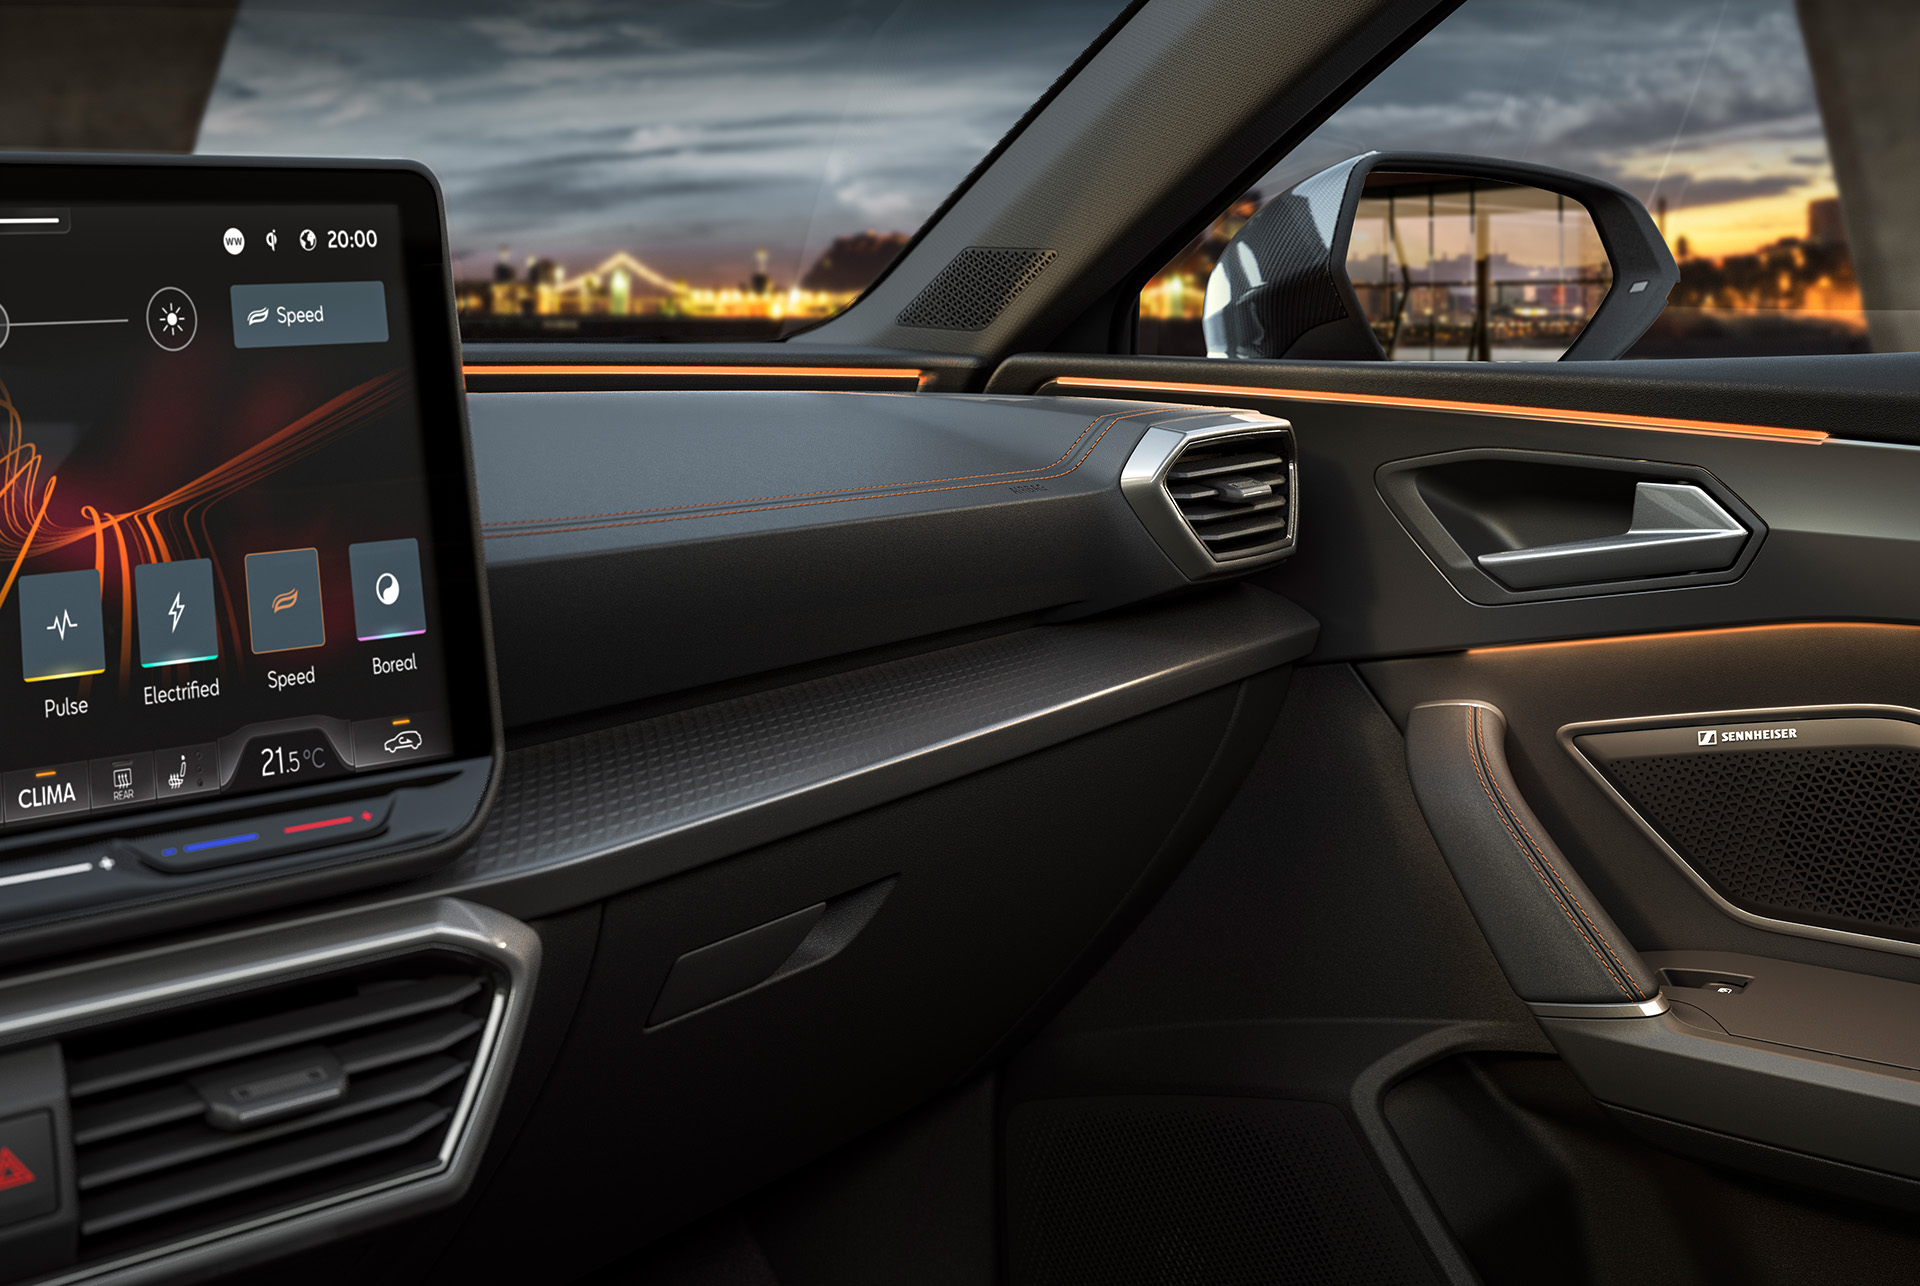 new cupra leon 2024 edge equipment upgrade technology, ambient lighting and infotainment system. Keyless advanced, anti-theft system and a rear view camera.